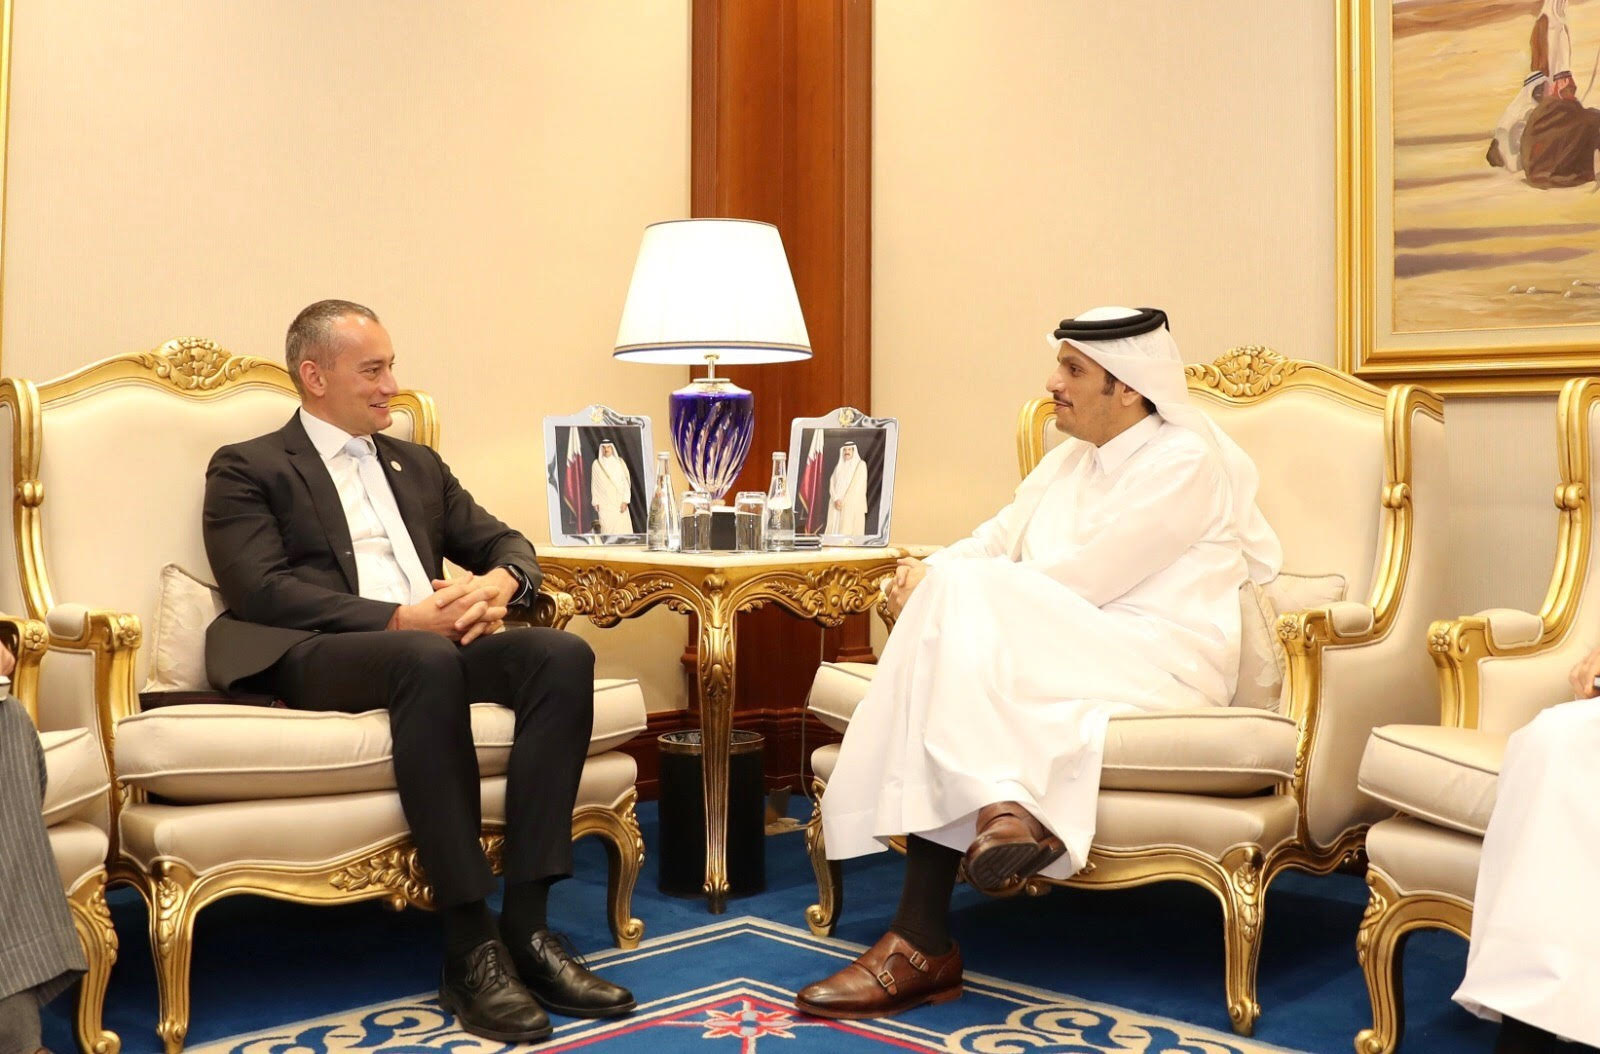 Deputy Prime Minister and Minister of Foreign Affairs Meets UN Officials